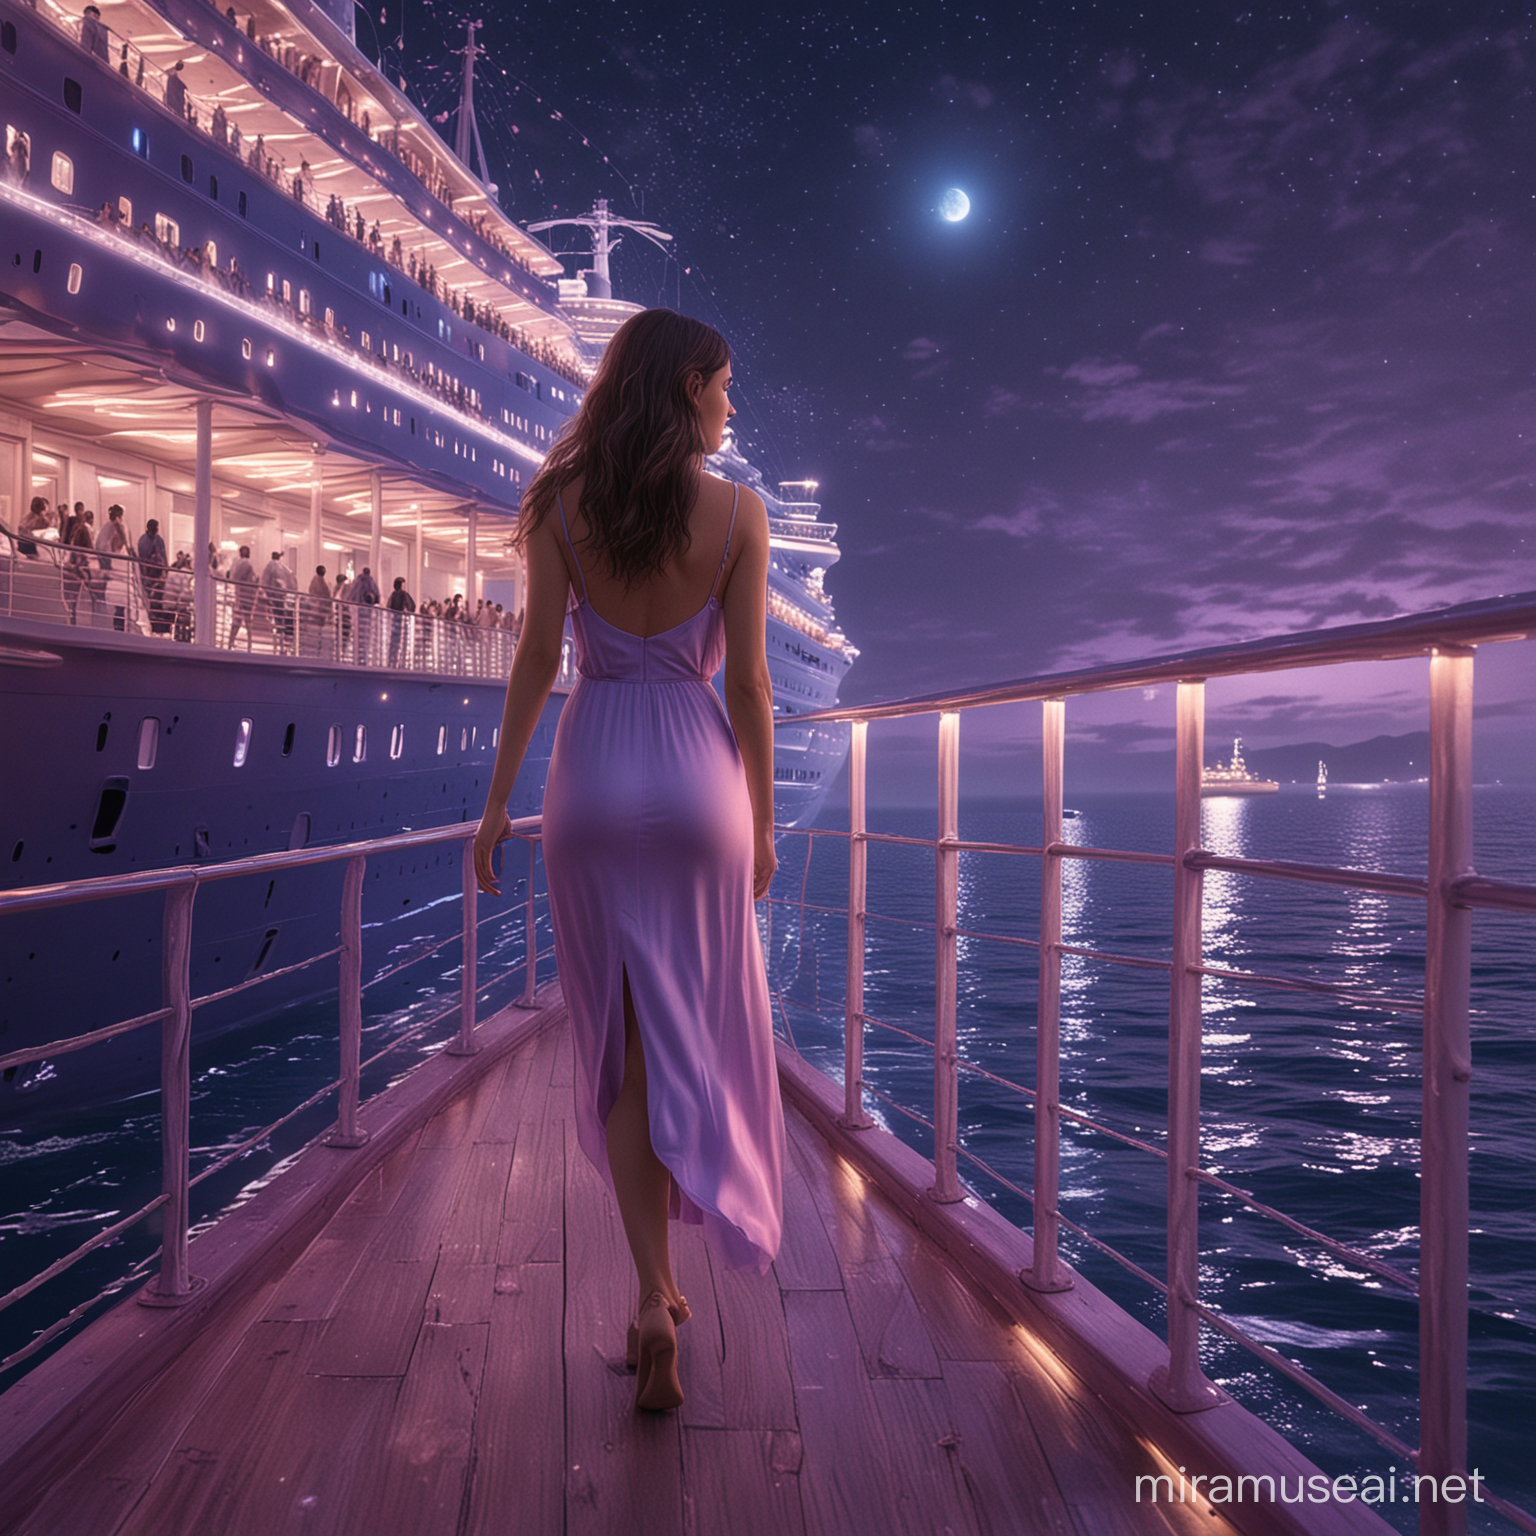 Elegant Women on Enchanted Cruise Admiring Midnight Dolphins and Coastal Town